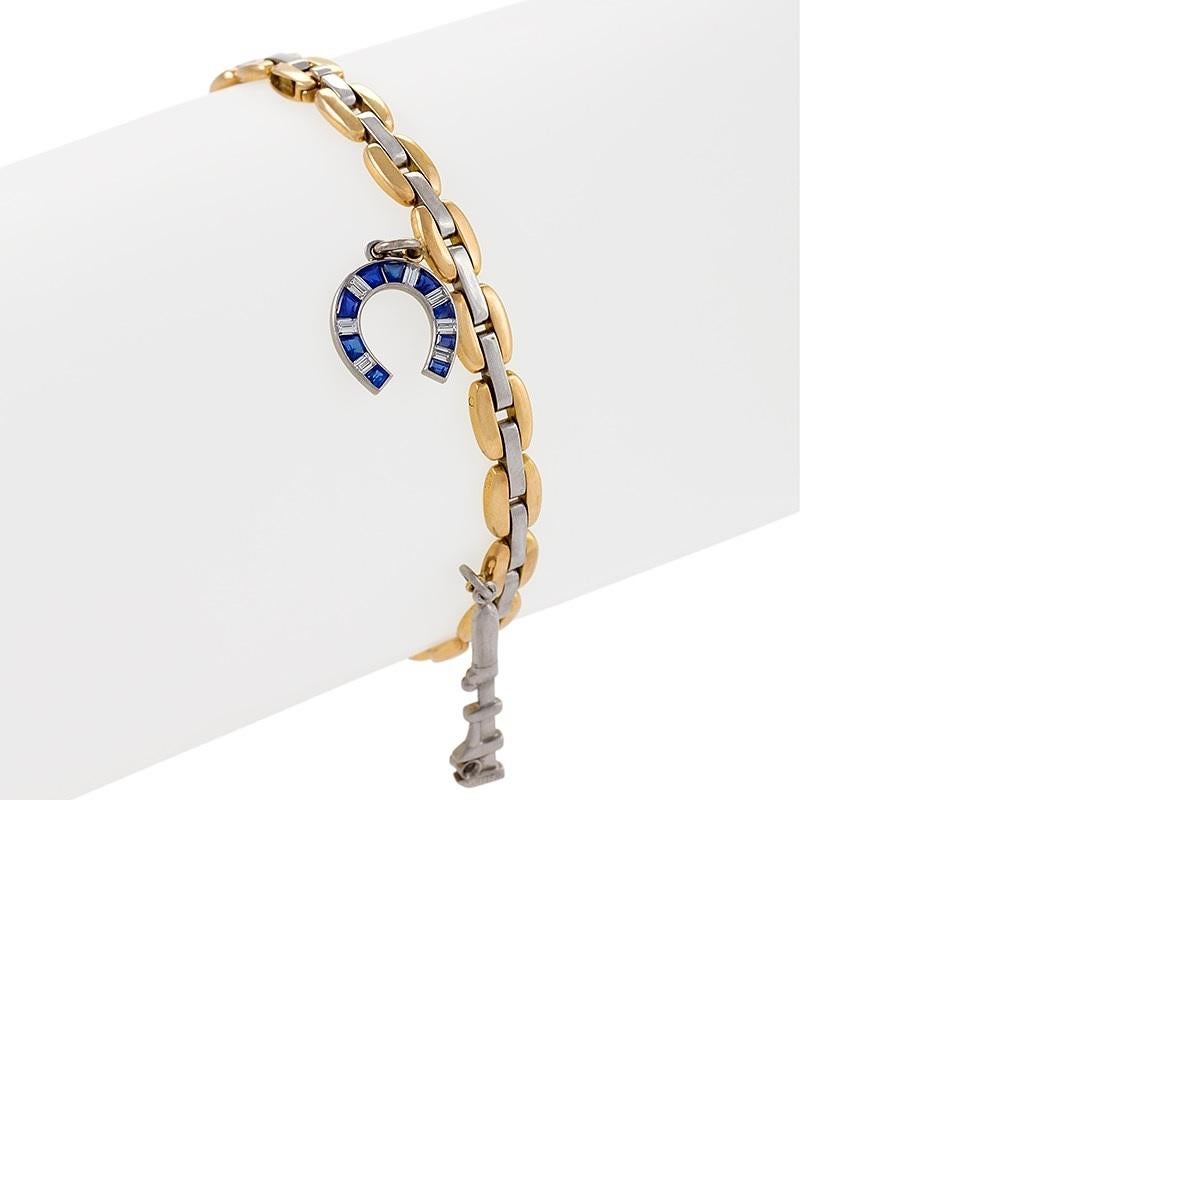 A two tone bracelet in platinum and 18k yellow gold with charms by Cartier. The bracelet has five charms, a sapphire and diamond horseshoe, a diamond accented wrench, a pair of fully articulated scissors, a house with emerald and sapphire accents